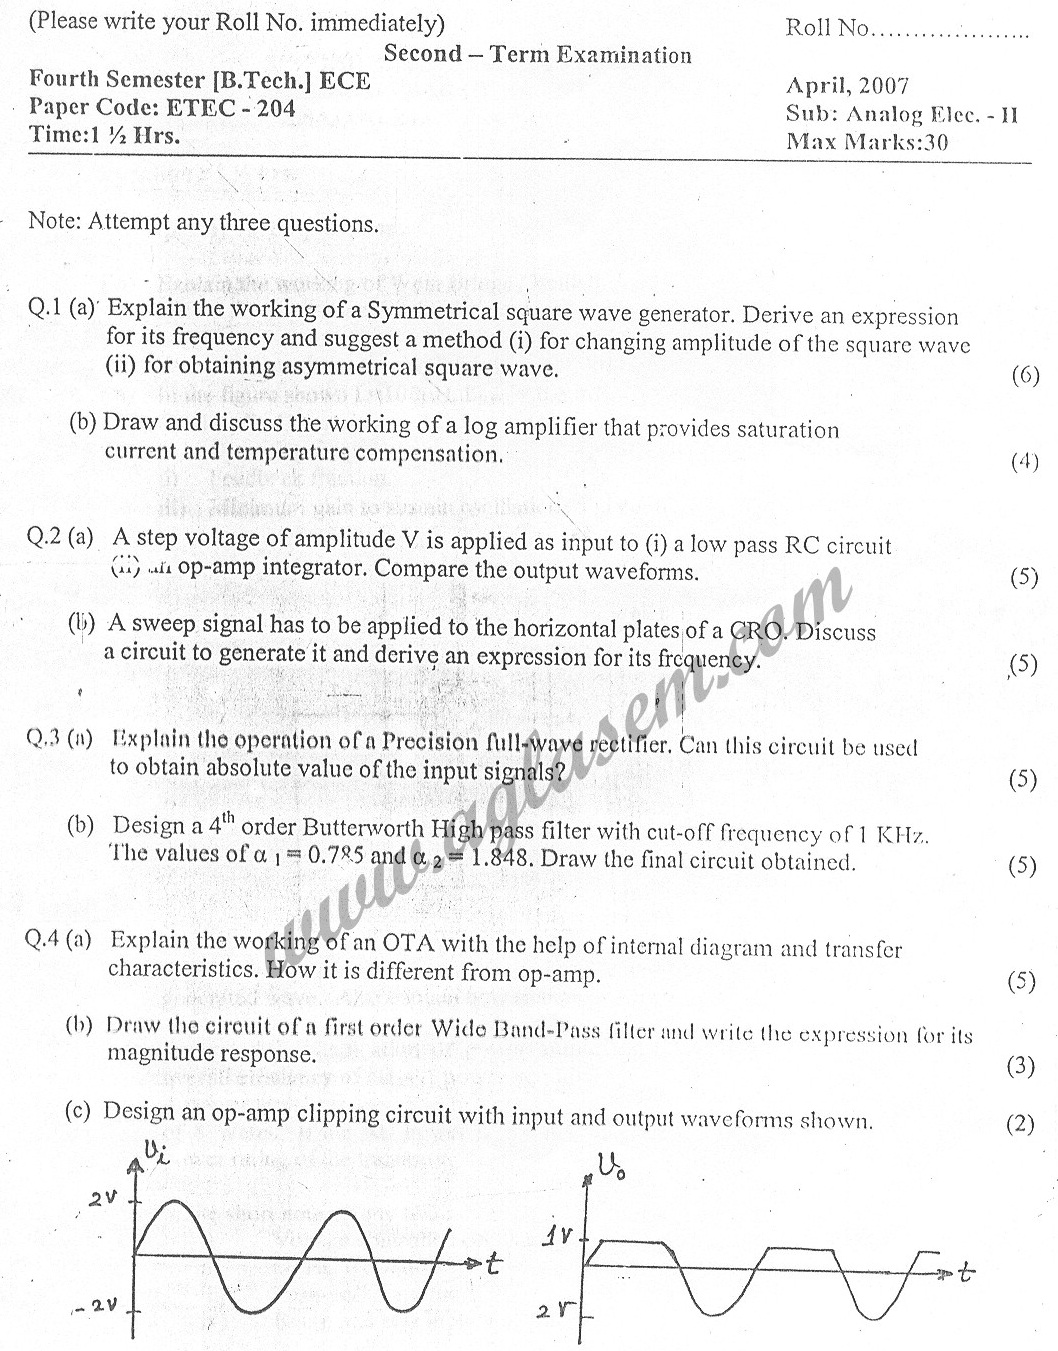 GGSIPU Question Papers Fourth Semester  Second Term 2007  ETEC-204